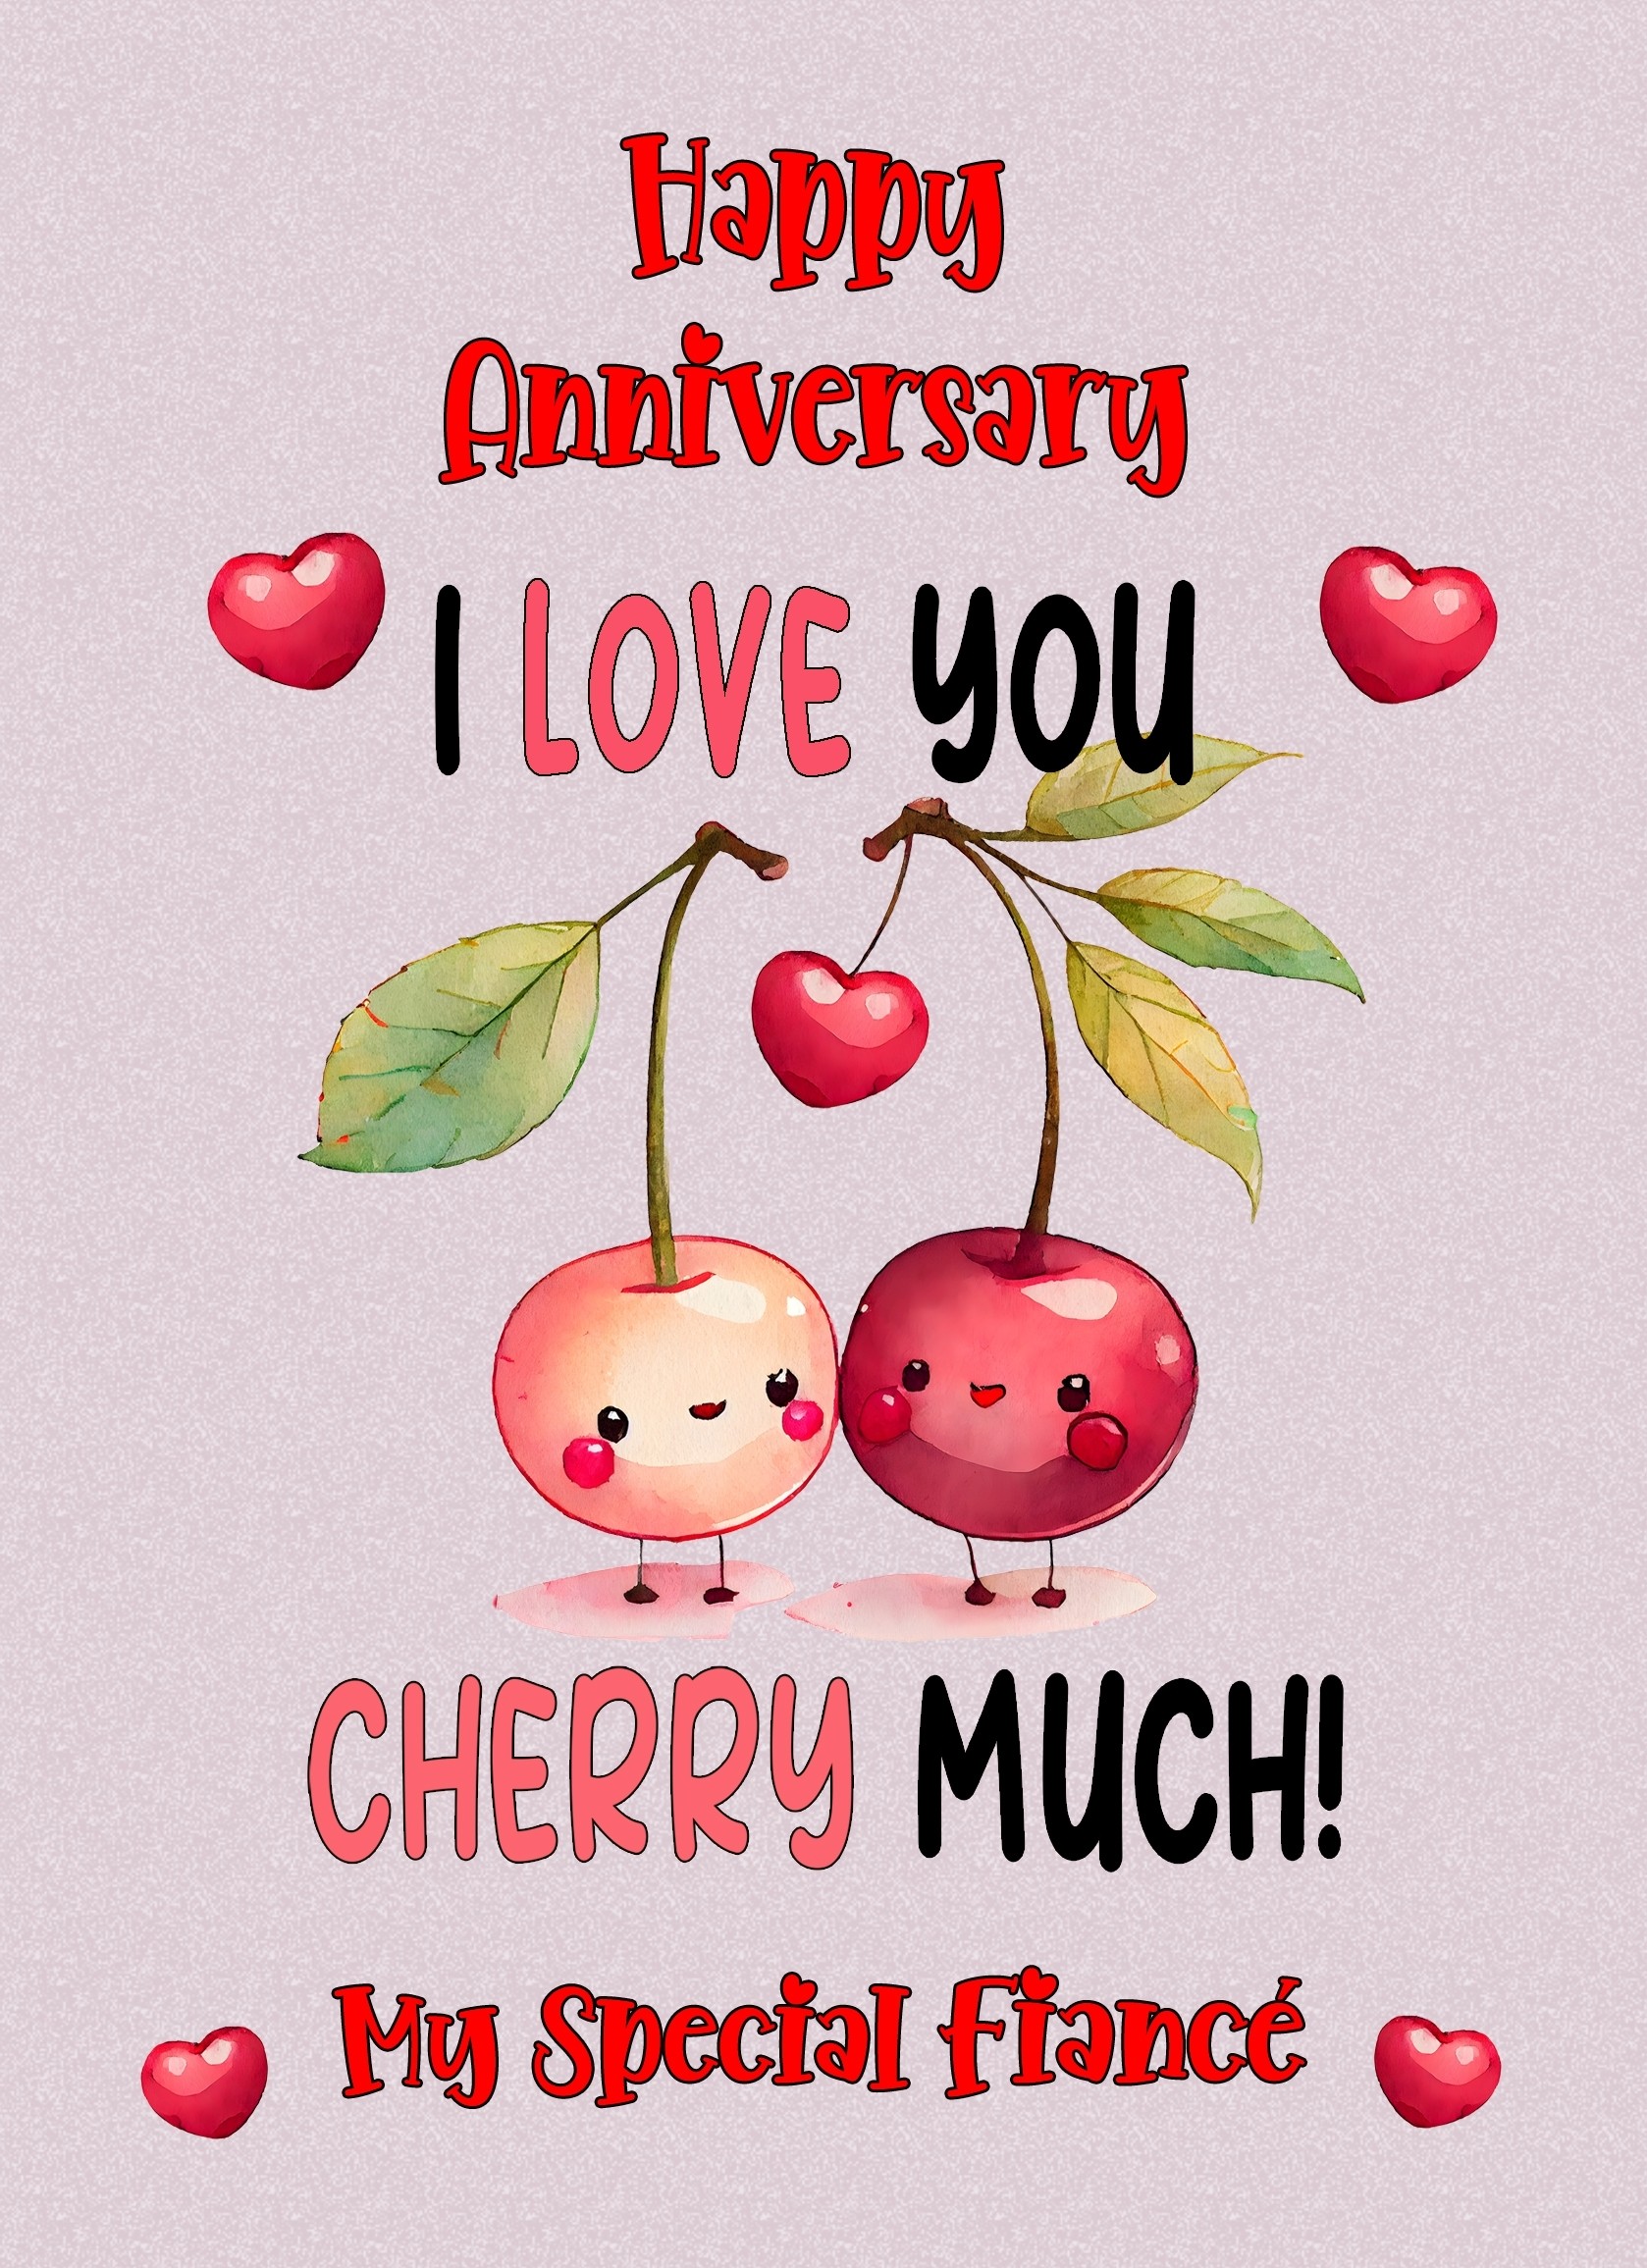 Funny Pun Romantic Anniversary Card for Fiance (Cherry Much)